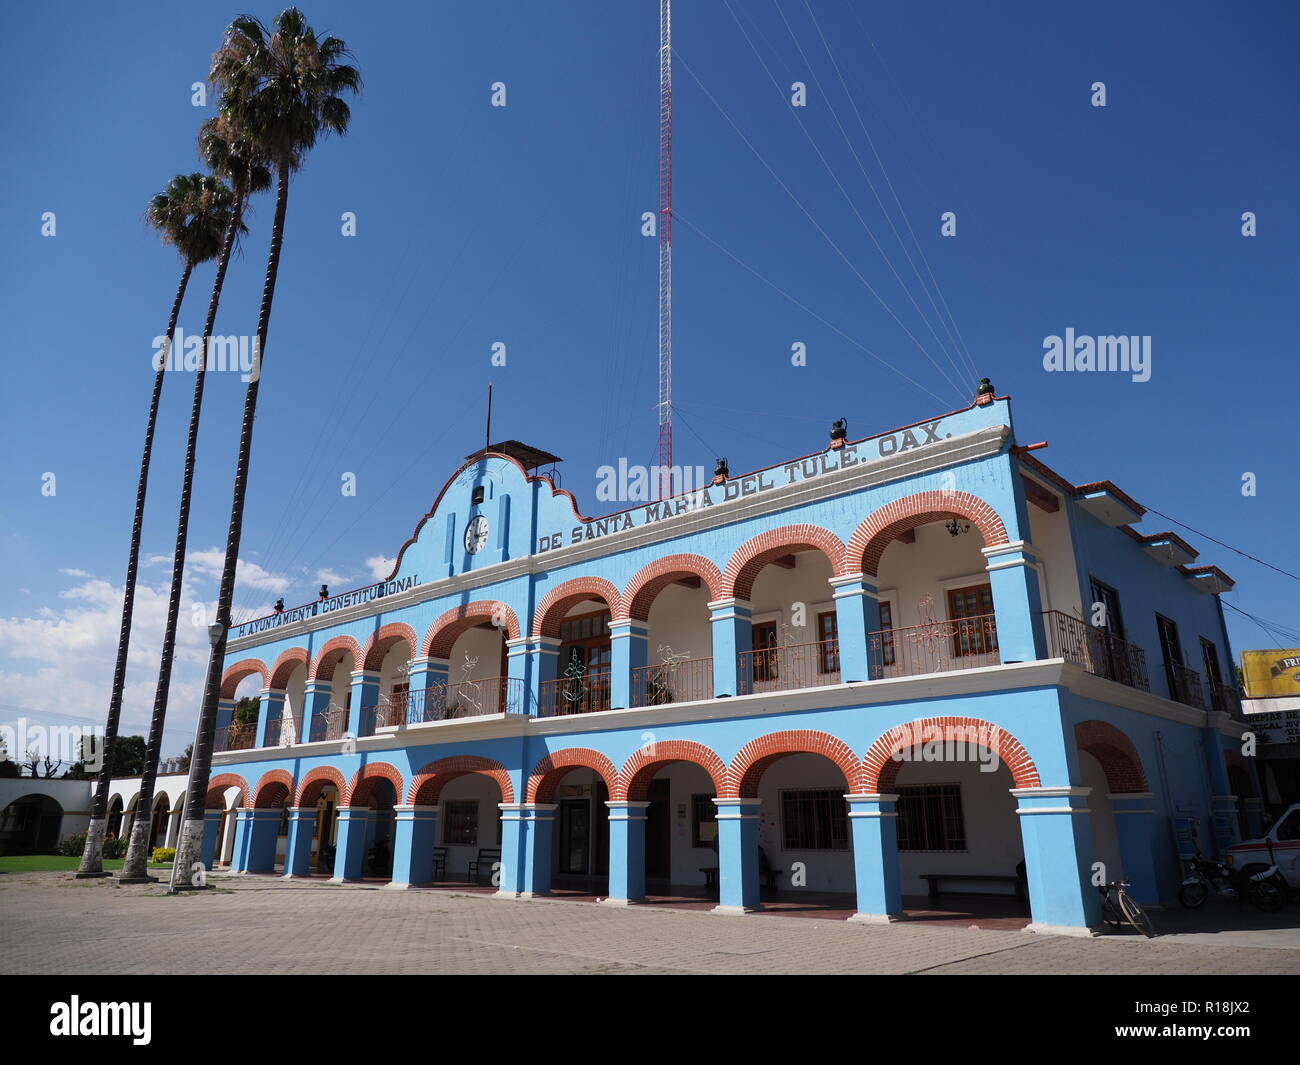 SANTA MARIA del TULE, NORTH AMERICA MEXICO on FEBRUARY 2018: Outside of side of town hall on main market square in mexican city center at Oaxaca state Stock Photo